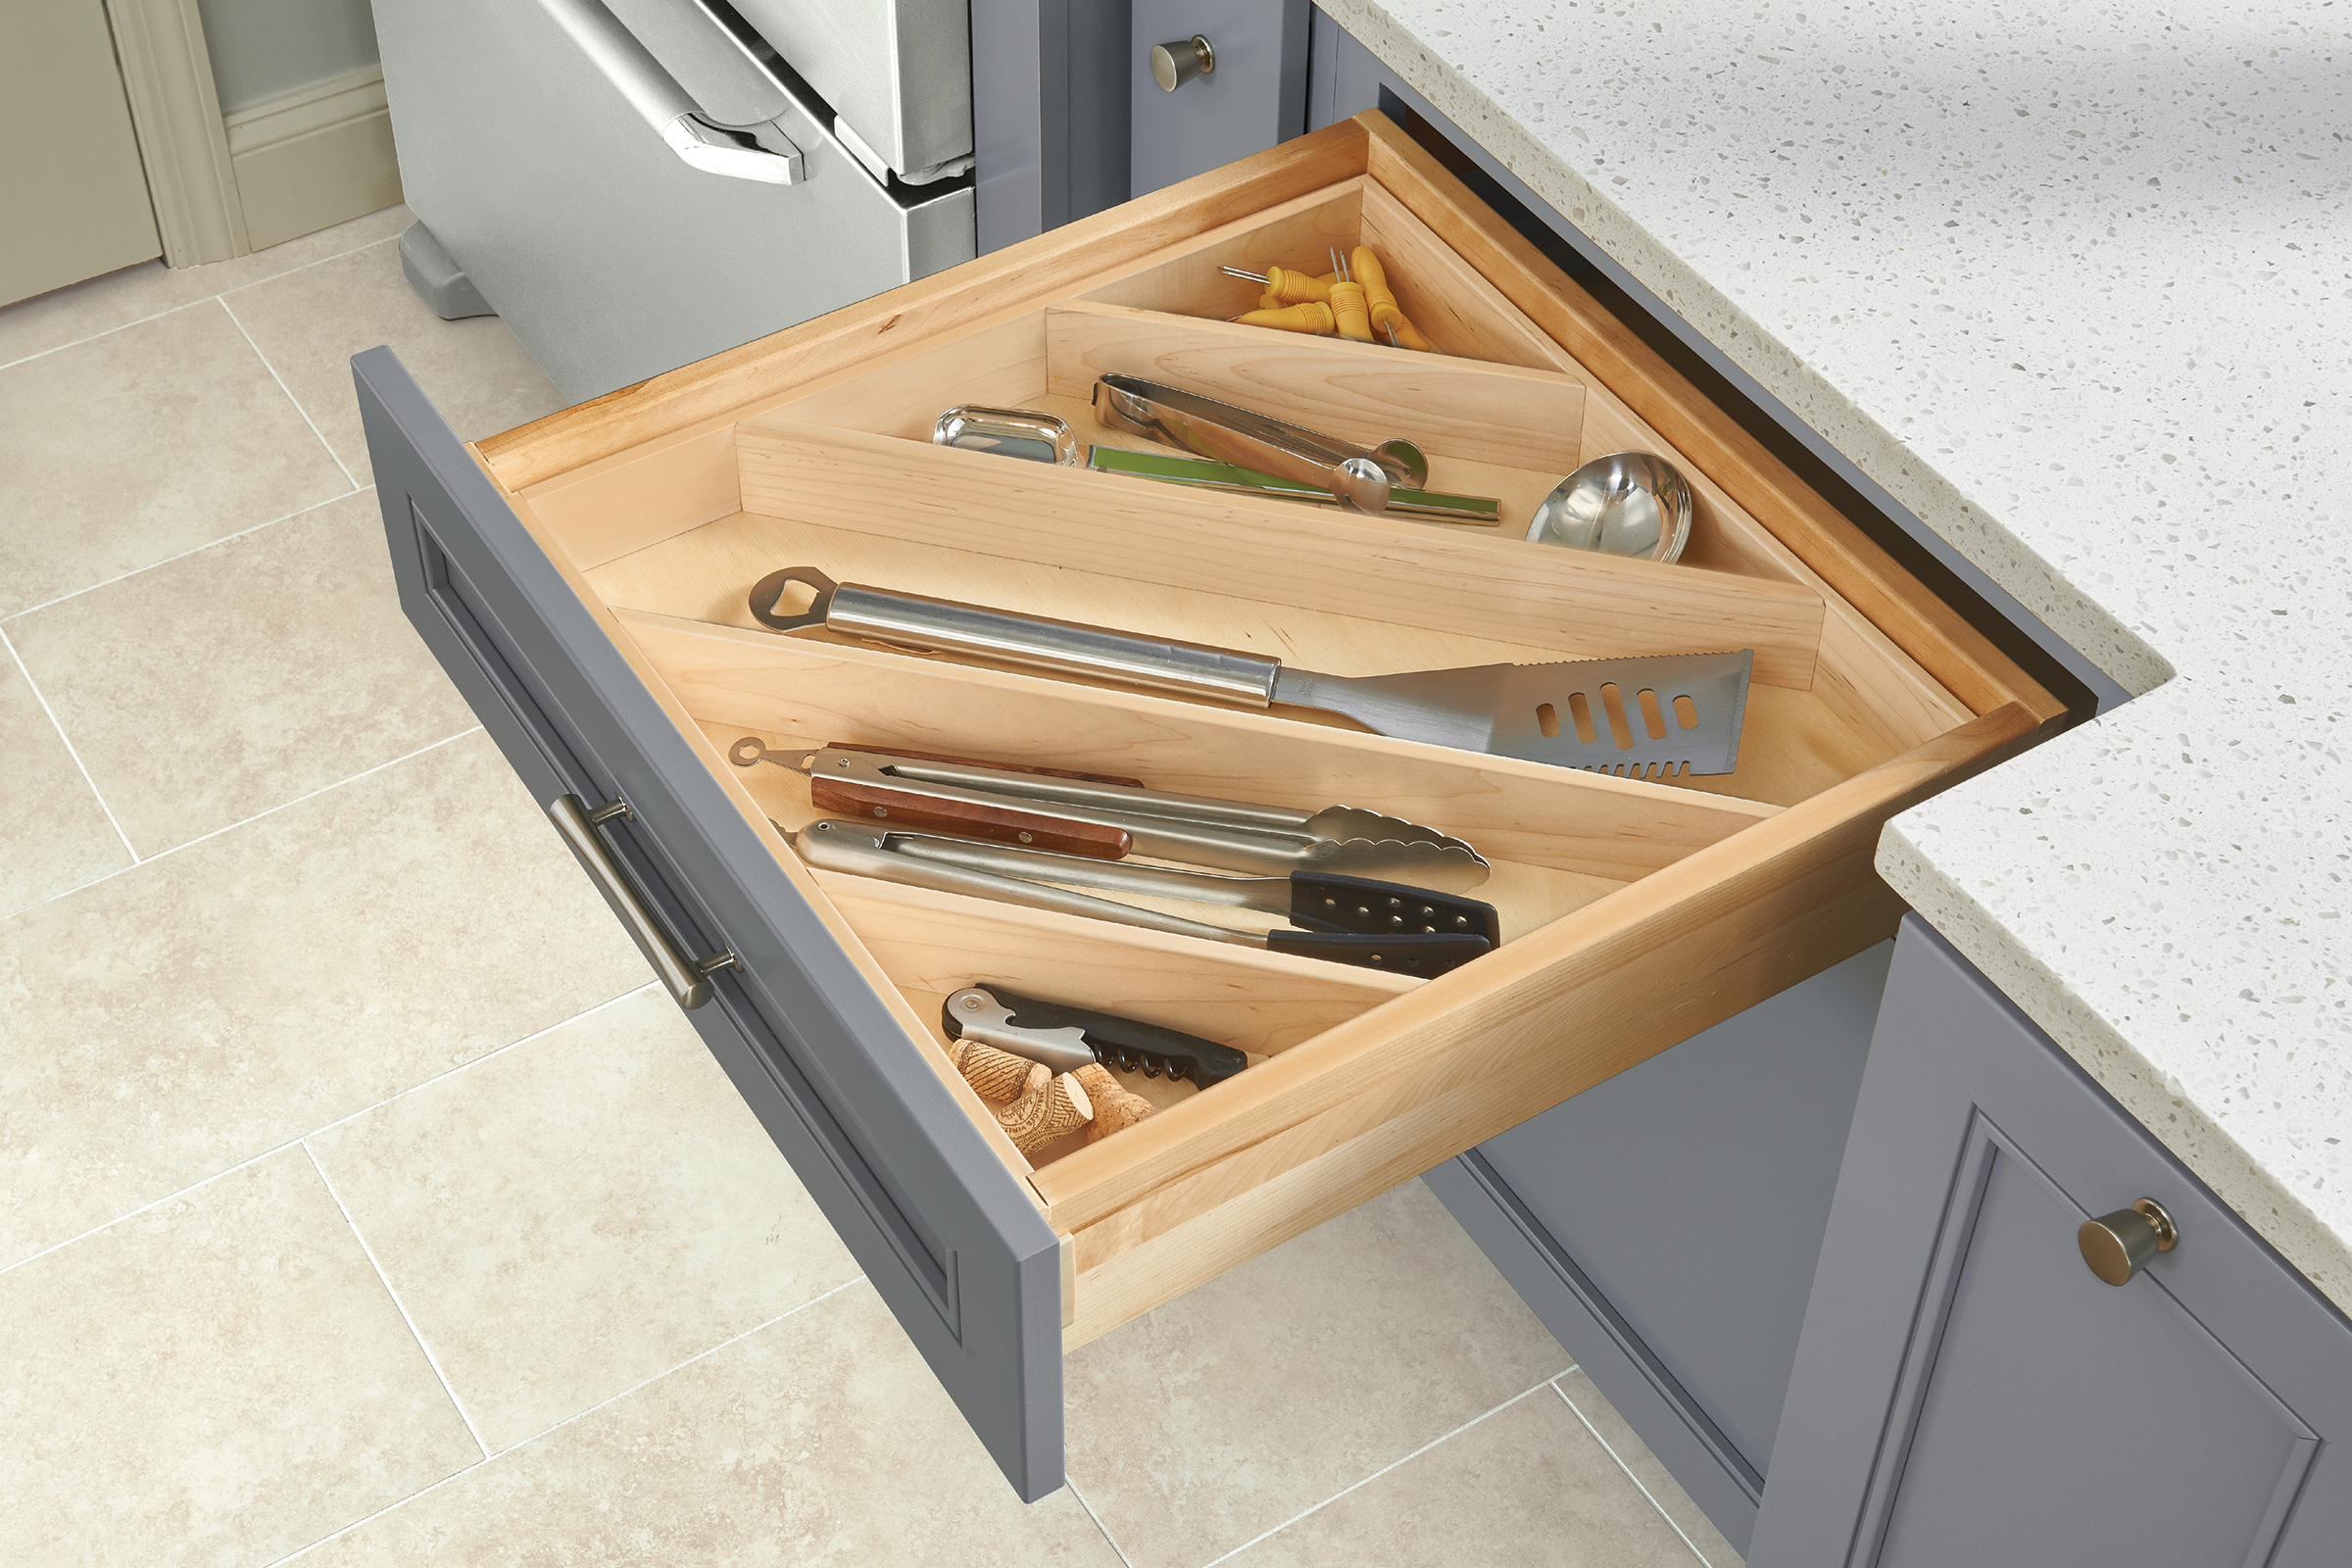 Various kitchen utensils neatly organized in a drawer with angled dividers